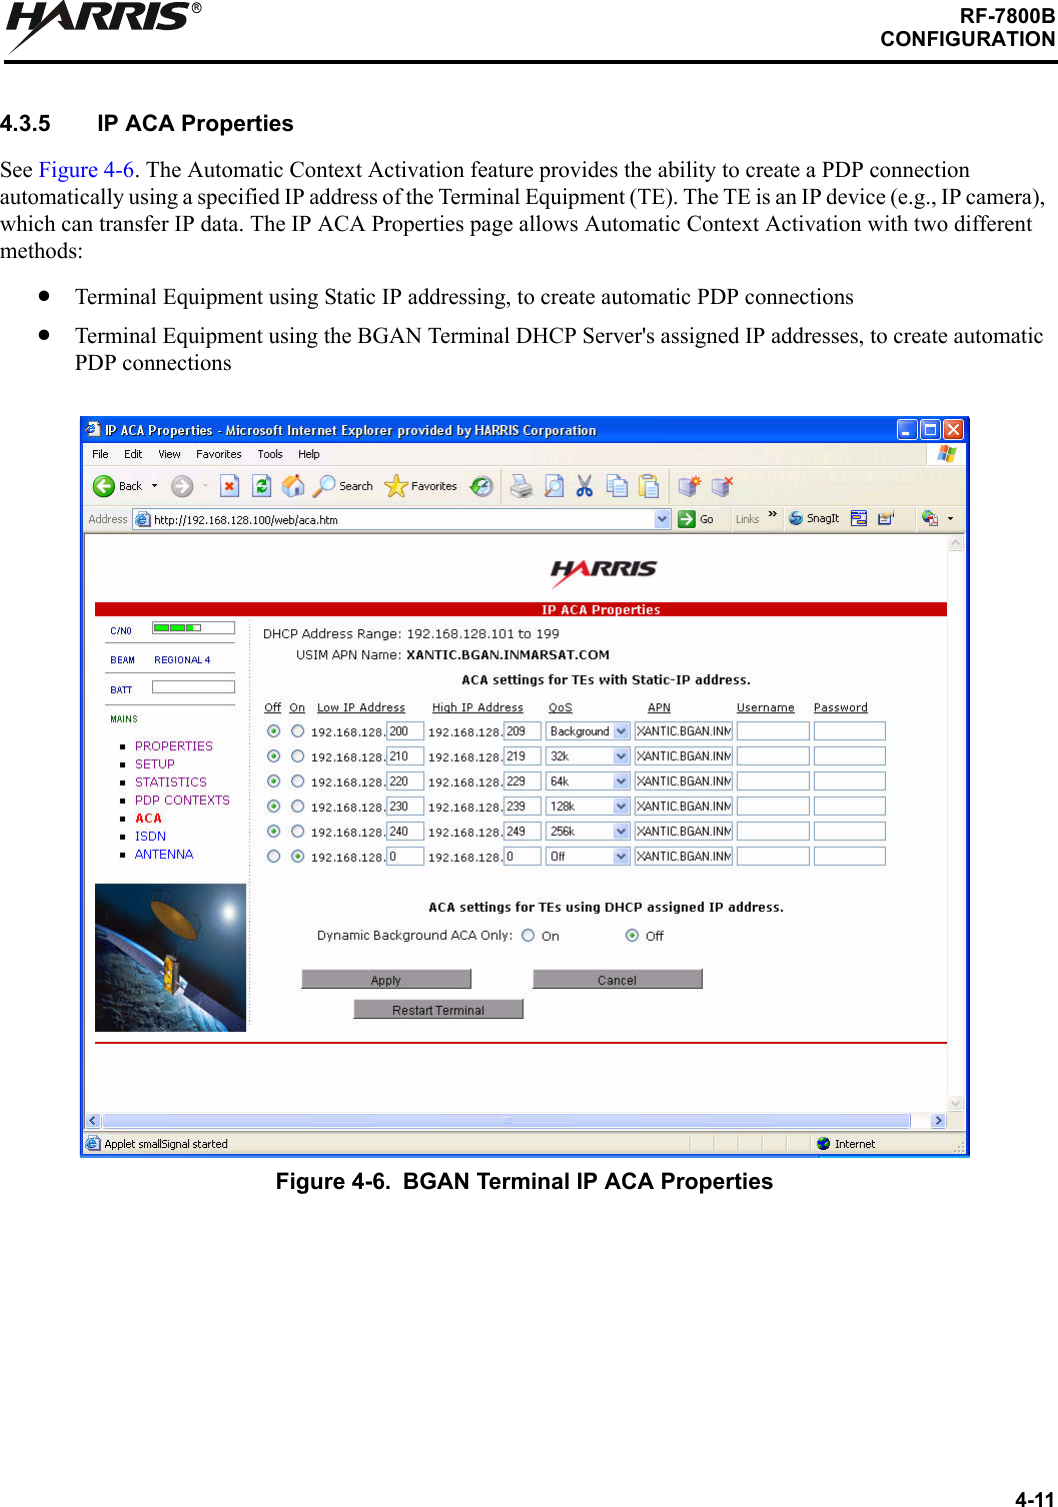 4-11RF-7800BCONFIGURATIONR4.3.5 IP ACA PropertiesSee Figure 4-6. The Automatic Context Activation feature provides the ability to create a PDP connection automatically using a specified IP address of the Terminal Equipment (TE). The TE is an IP device (e.g., IP camera), which can transfer IP data. The IP ACA Properties page allows Automatic Context Activation with two different methods:Terminal Equipment using Static IP addressing, to create automatic PDP connectionsTerminal Equipment using the BGAN Terminal DHCP Server&apos;s assigned IP addresses, to create automatic PDP connectionsFigure 4-6. BGAN Terminal IP ACA Properties